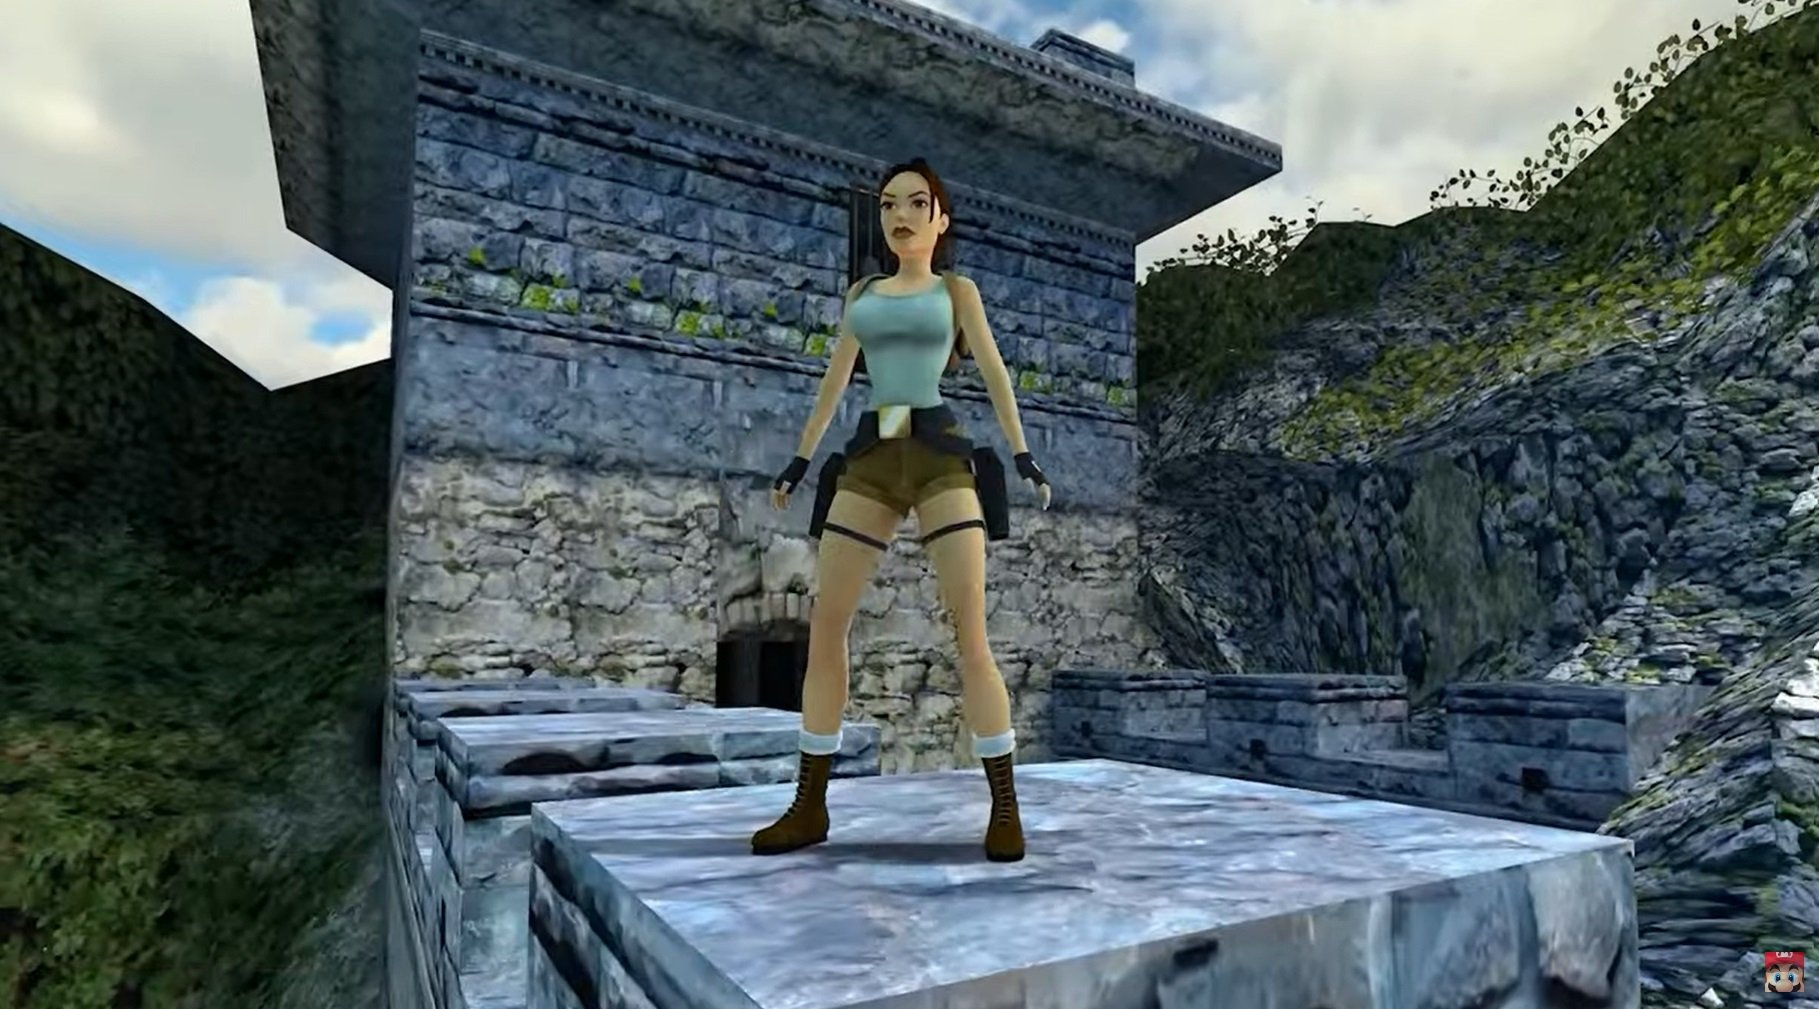 Tomb Raider Trilogy Remastered release date, Pre-order & latest news